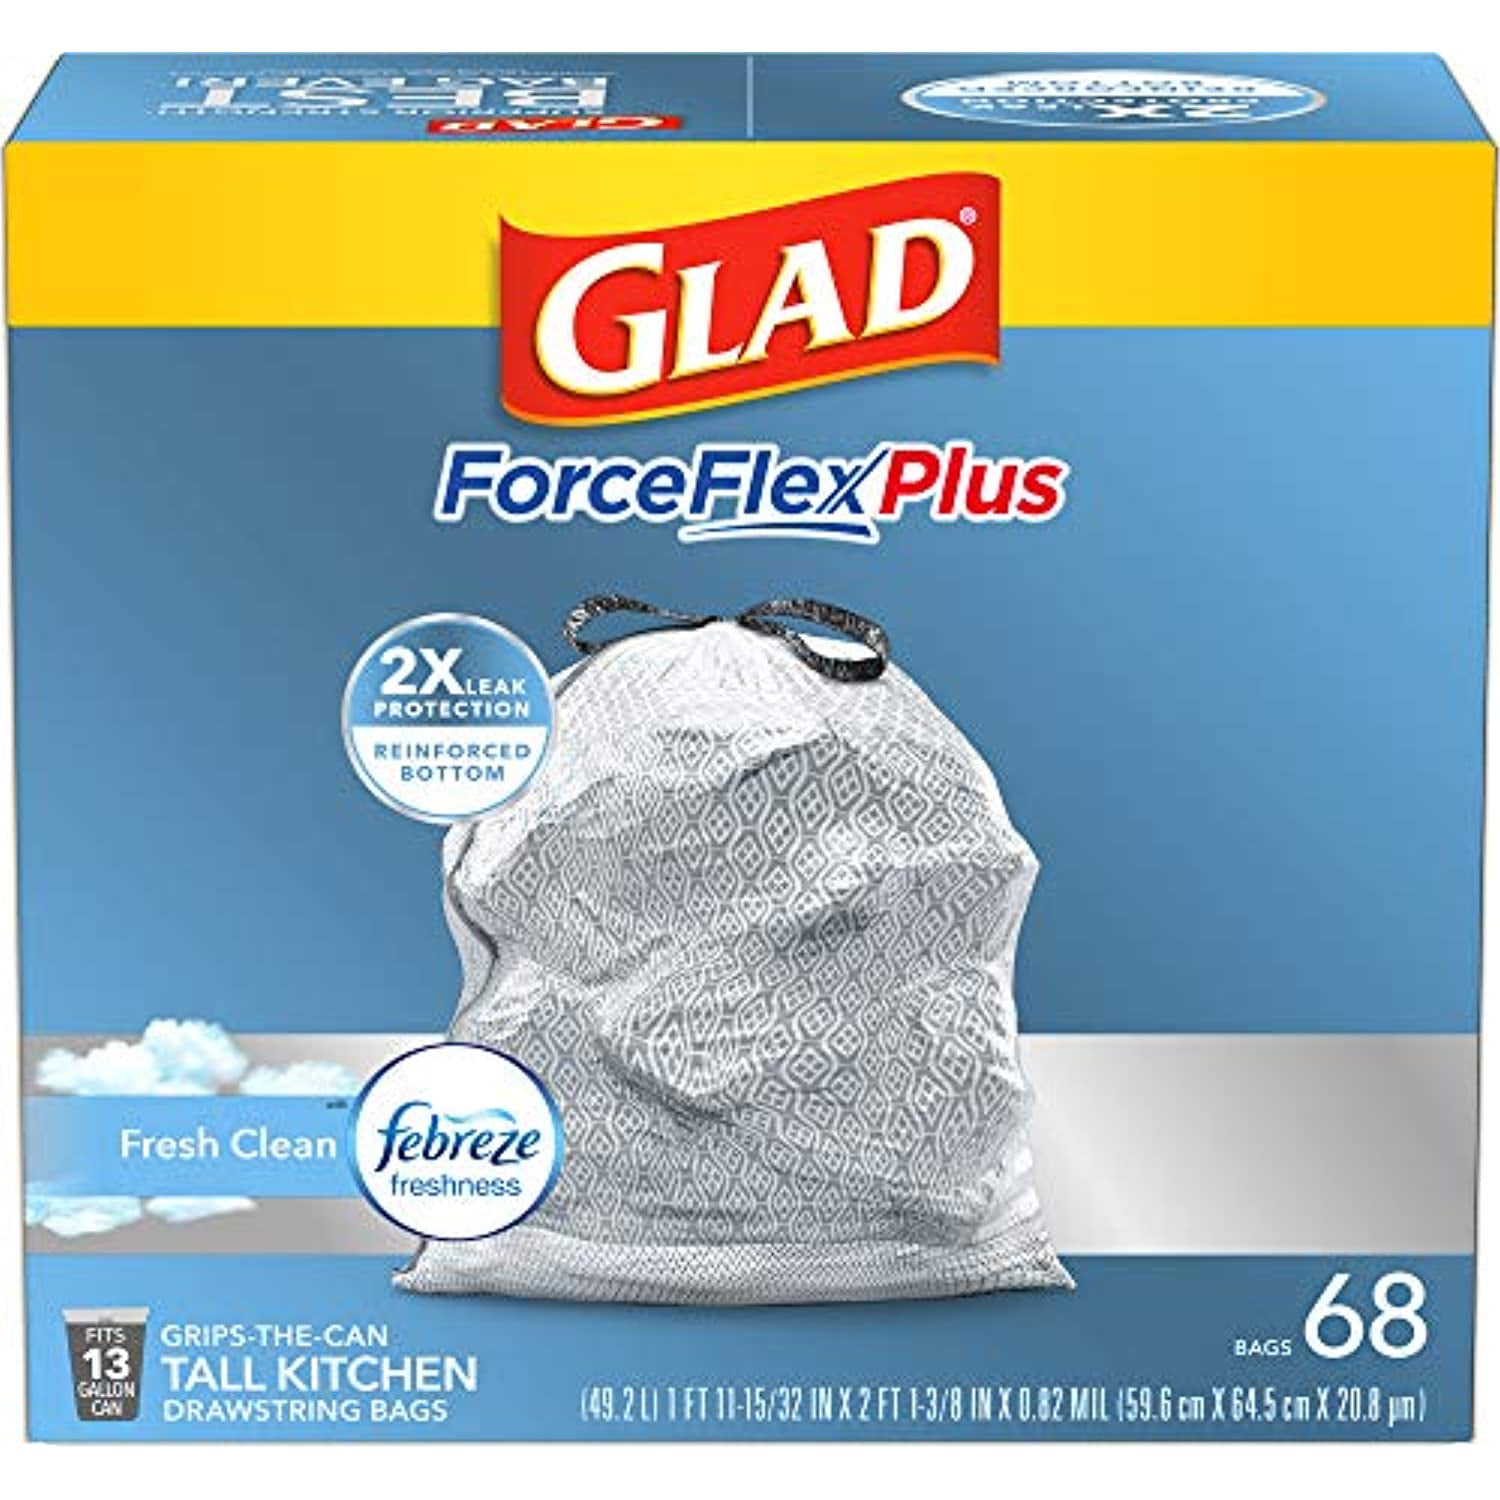  Glad Tall Kitchen Quick-Tie Trash Bags - 13 Gallon White Trash  Bag 80 Count, Package May Vary : Health & Household